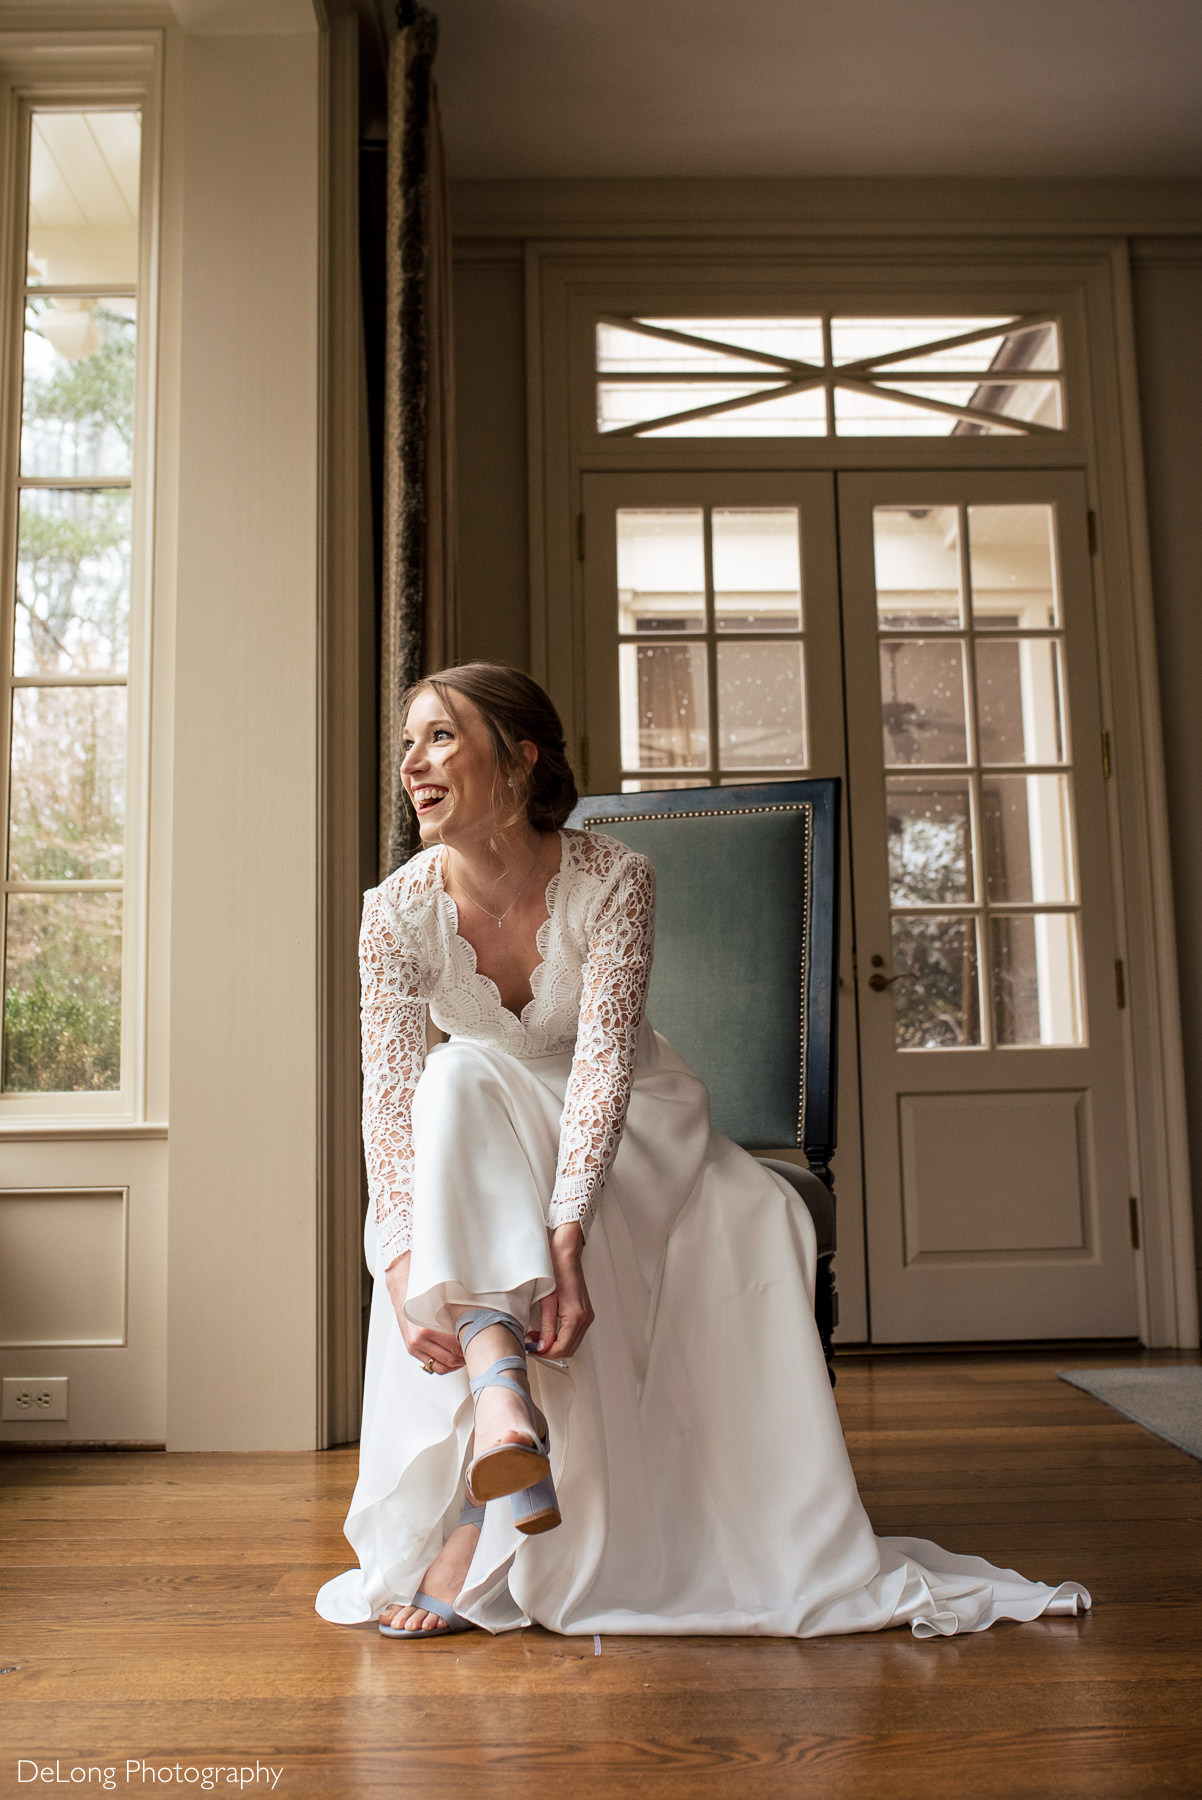 Seated portrait of a bride smiling and laughing while tying her cornflower blue wedding shoes by Charlotte wedding photographers DeLong Photography